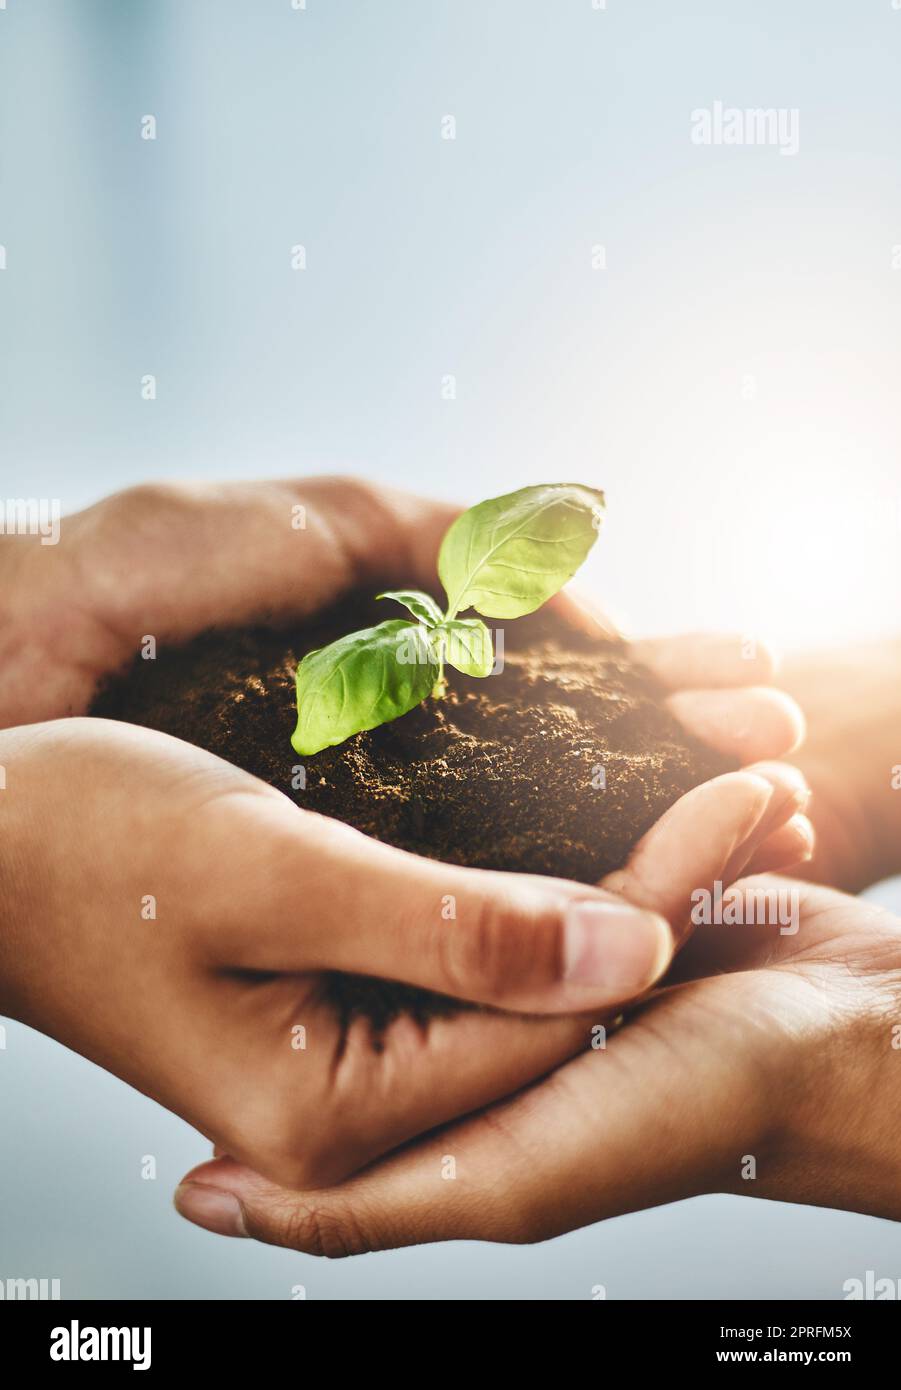 Hands holding plant while growing showing teamwork, conservation, togetherness, nature development and growth as a community. Closeup of people with organic green flower leaves on dirt inside Stock Photo